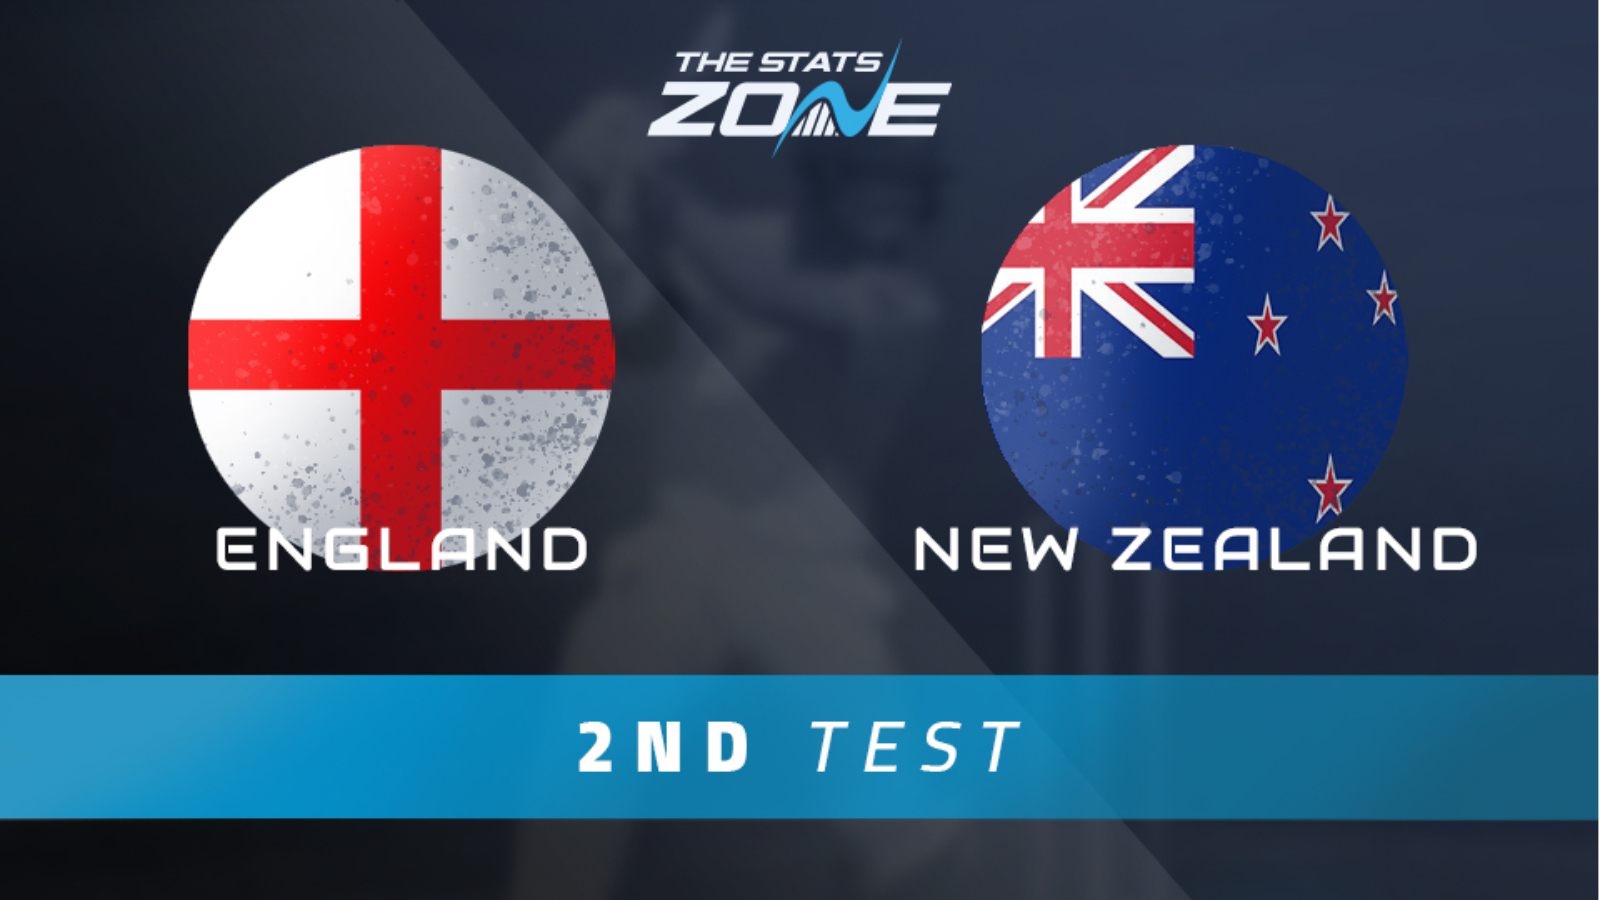 England vs New Zealand 2nd Test Match Preview & Prediction The